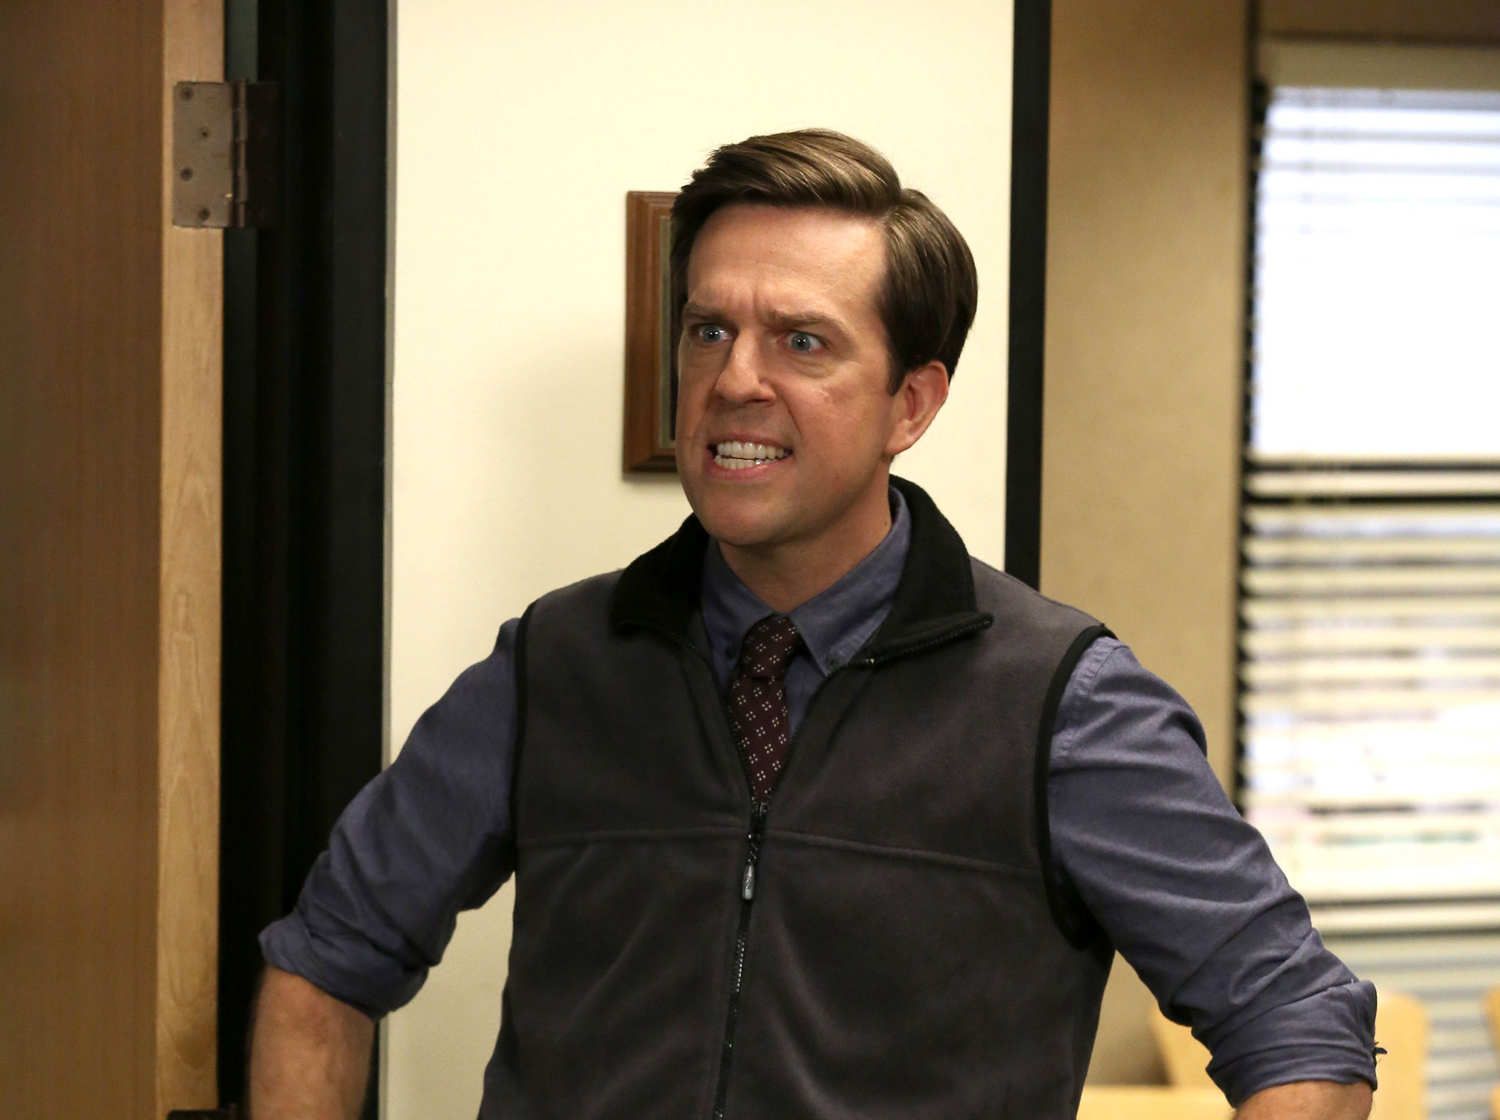 The Office Andy Bernard Ed Helms Season 9. In this he looks very angry